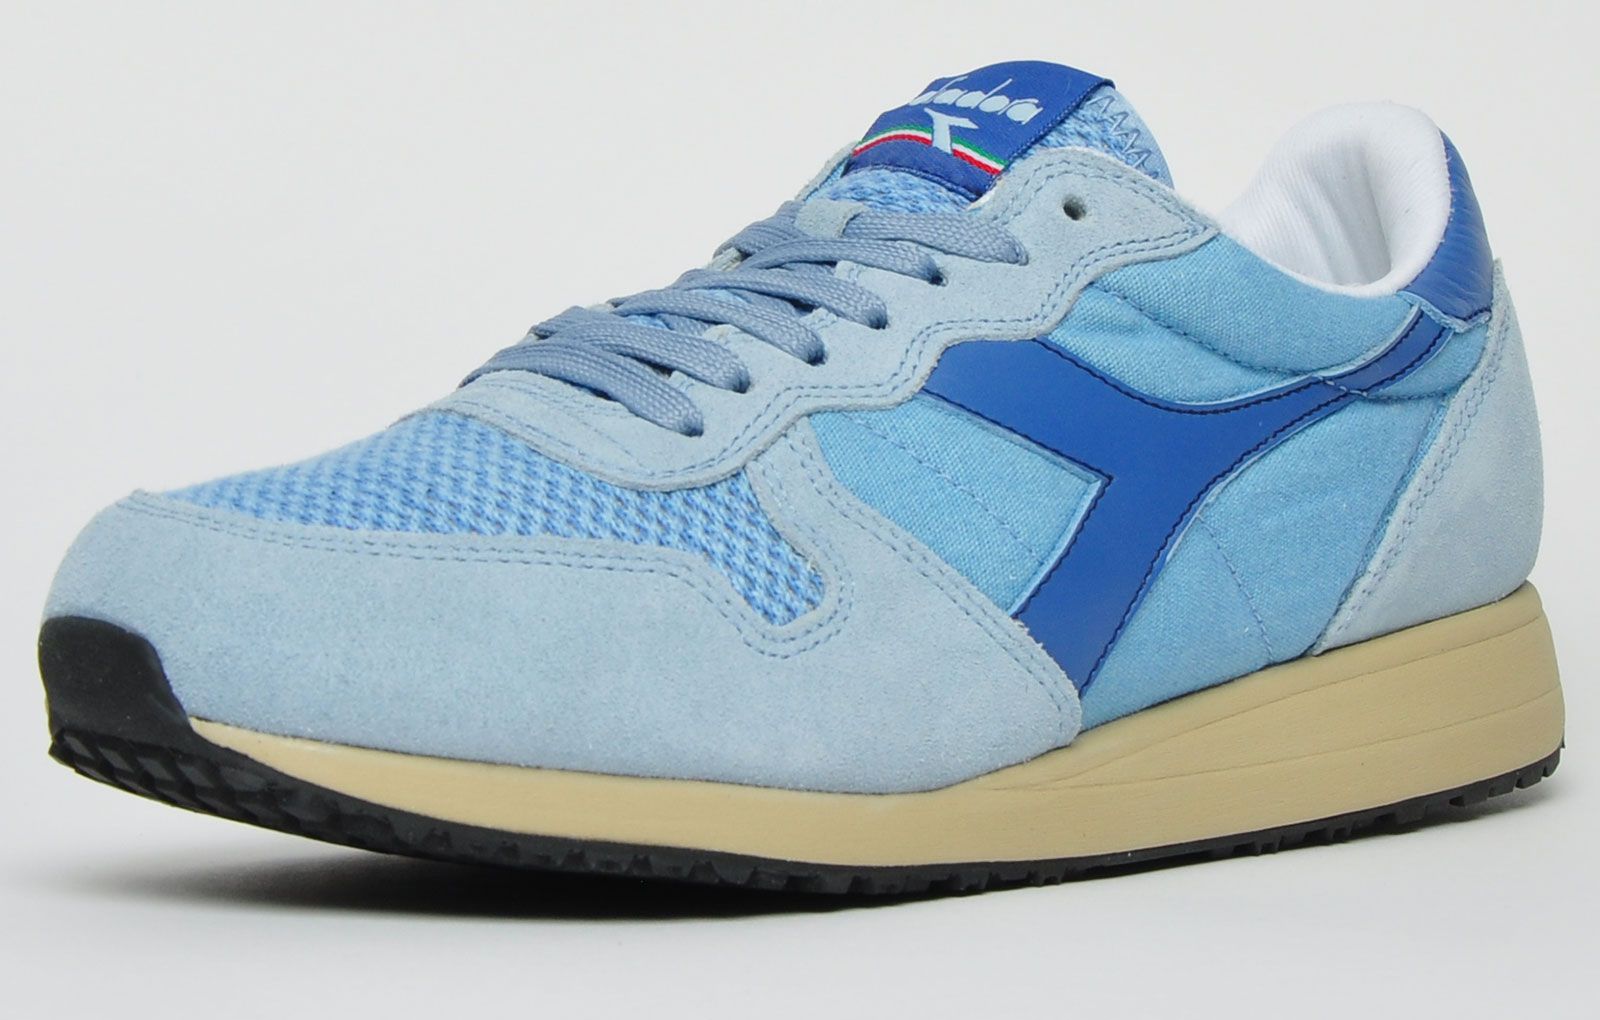 A reinvention of classic 80’s vintage styling, these Diadora Tornado men’s “made in Italy” trainers have been brought back to basics with premium materials in a classically styled men's shoe designed for casual wear. This trainer delivers top quality performance, with high quality materials in every single stitch, tastefully detailed throughout with suede leather overlays with timeless retro heritage styling providing a luxurious finish. Designed with your comfort in mind these men’s trainers sport a cushioned inner lining along with a plush eva insole for fatigue free wear. <p class=